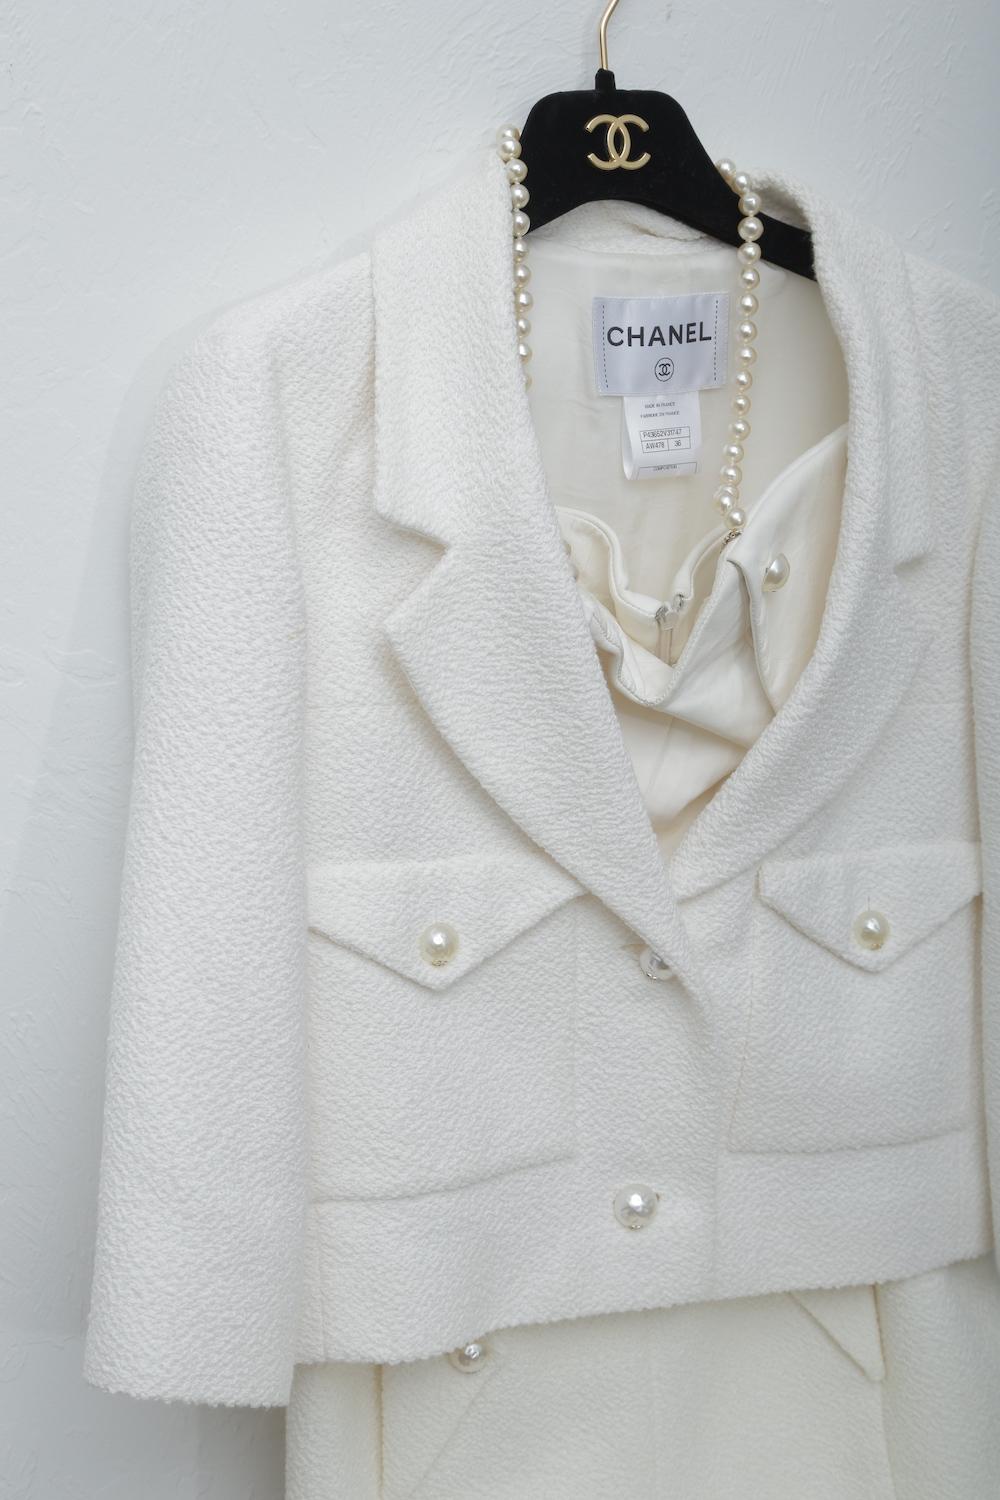 Chanel White Tweet Dress with Pearls with Matching Crop Jacket .
Size 2 with original Chanel hanger & garment bag.